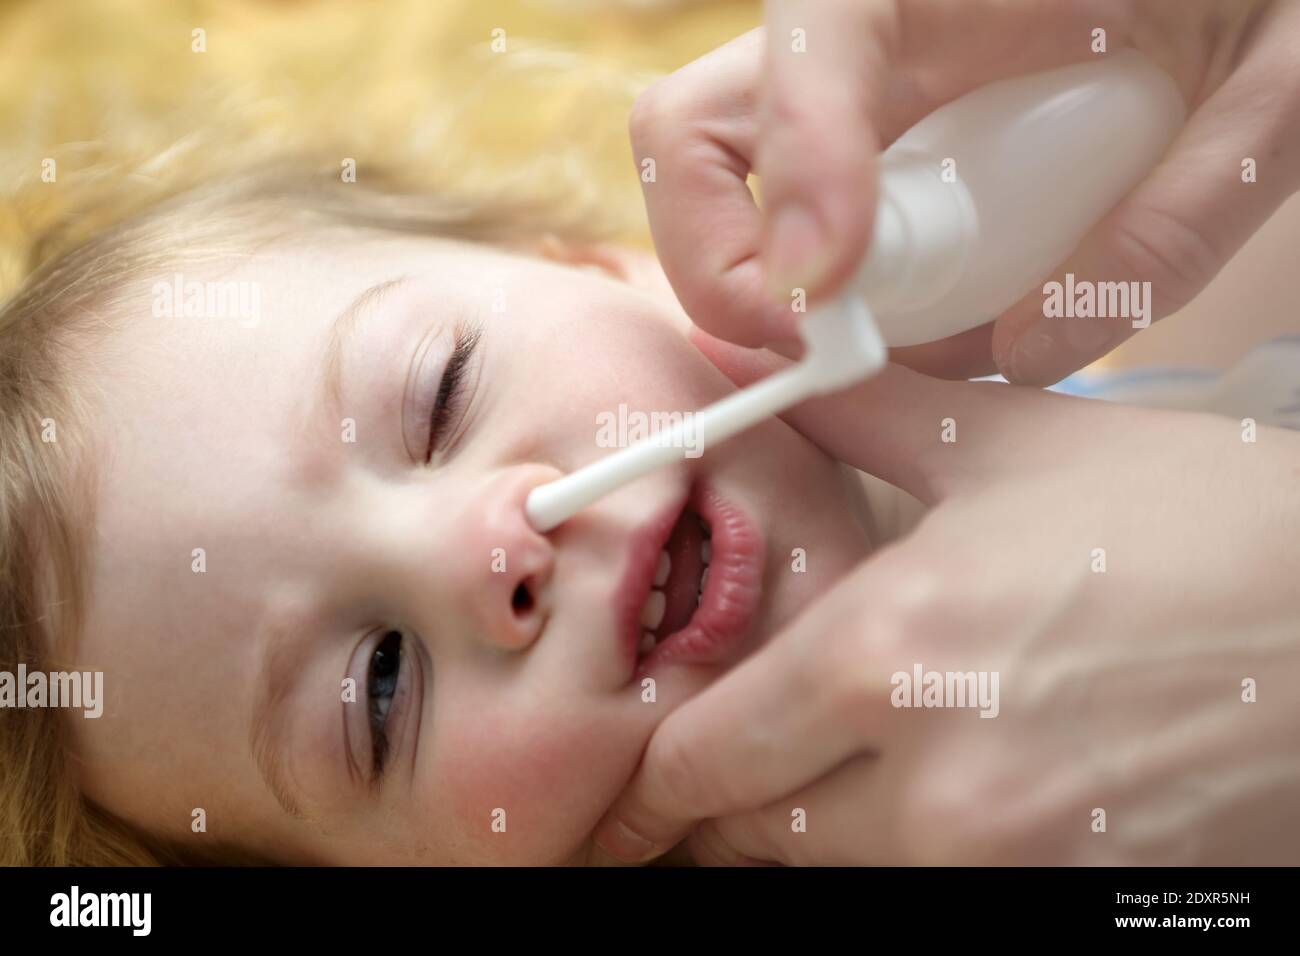 Child Inhaling Nasal Spray on bed at home Stock Photo